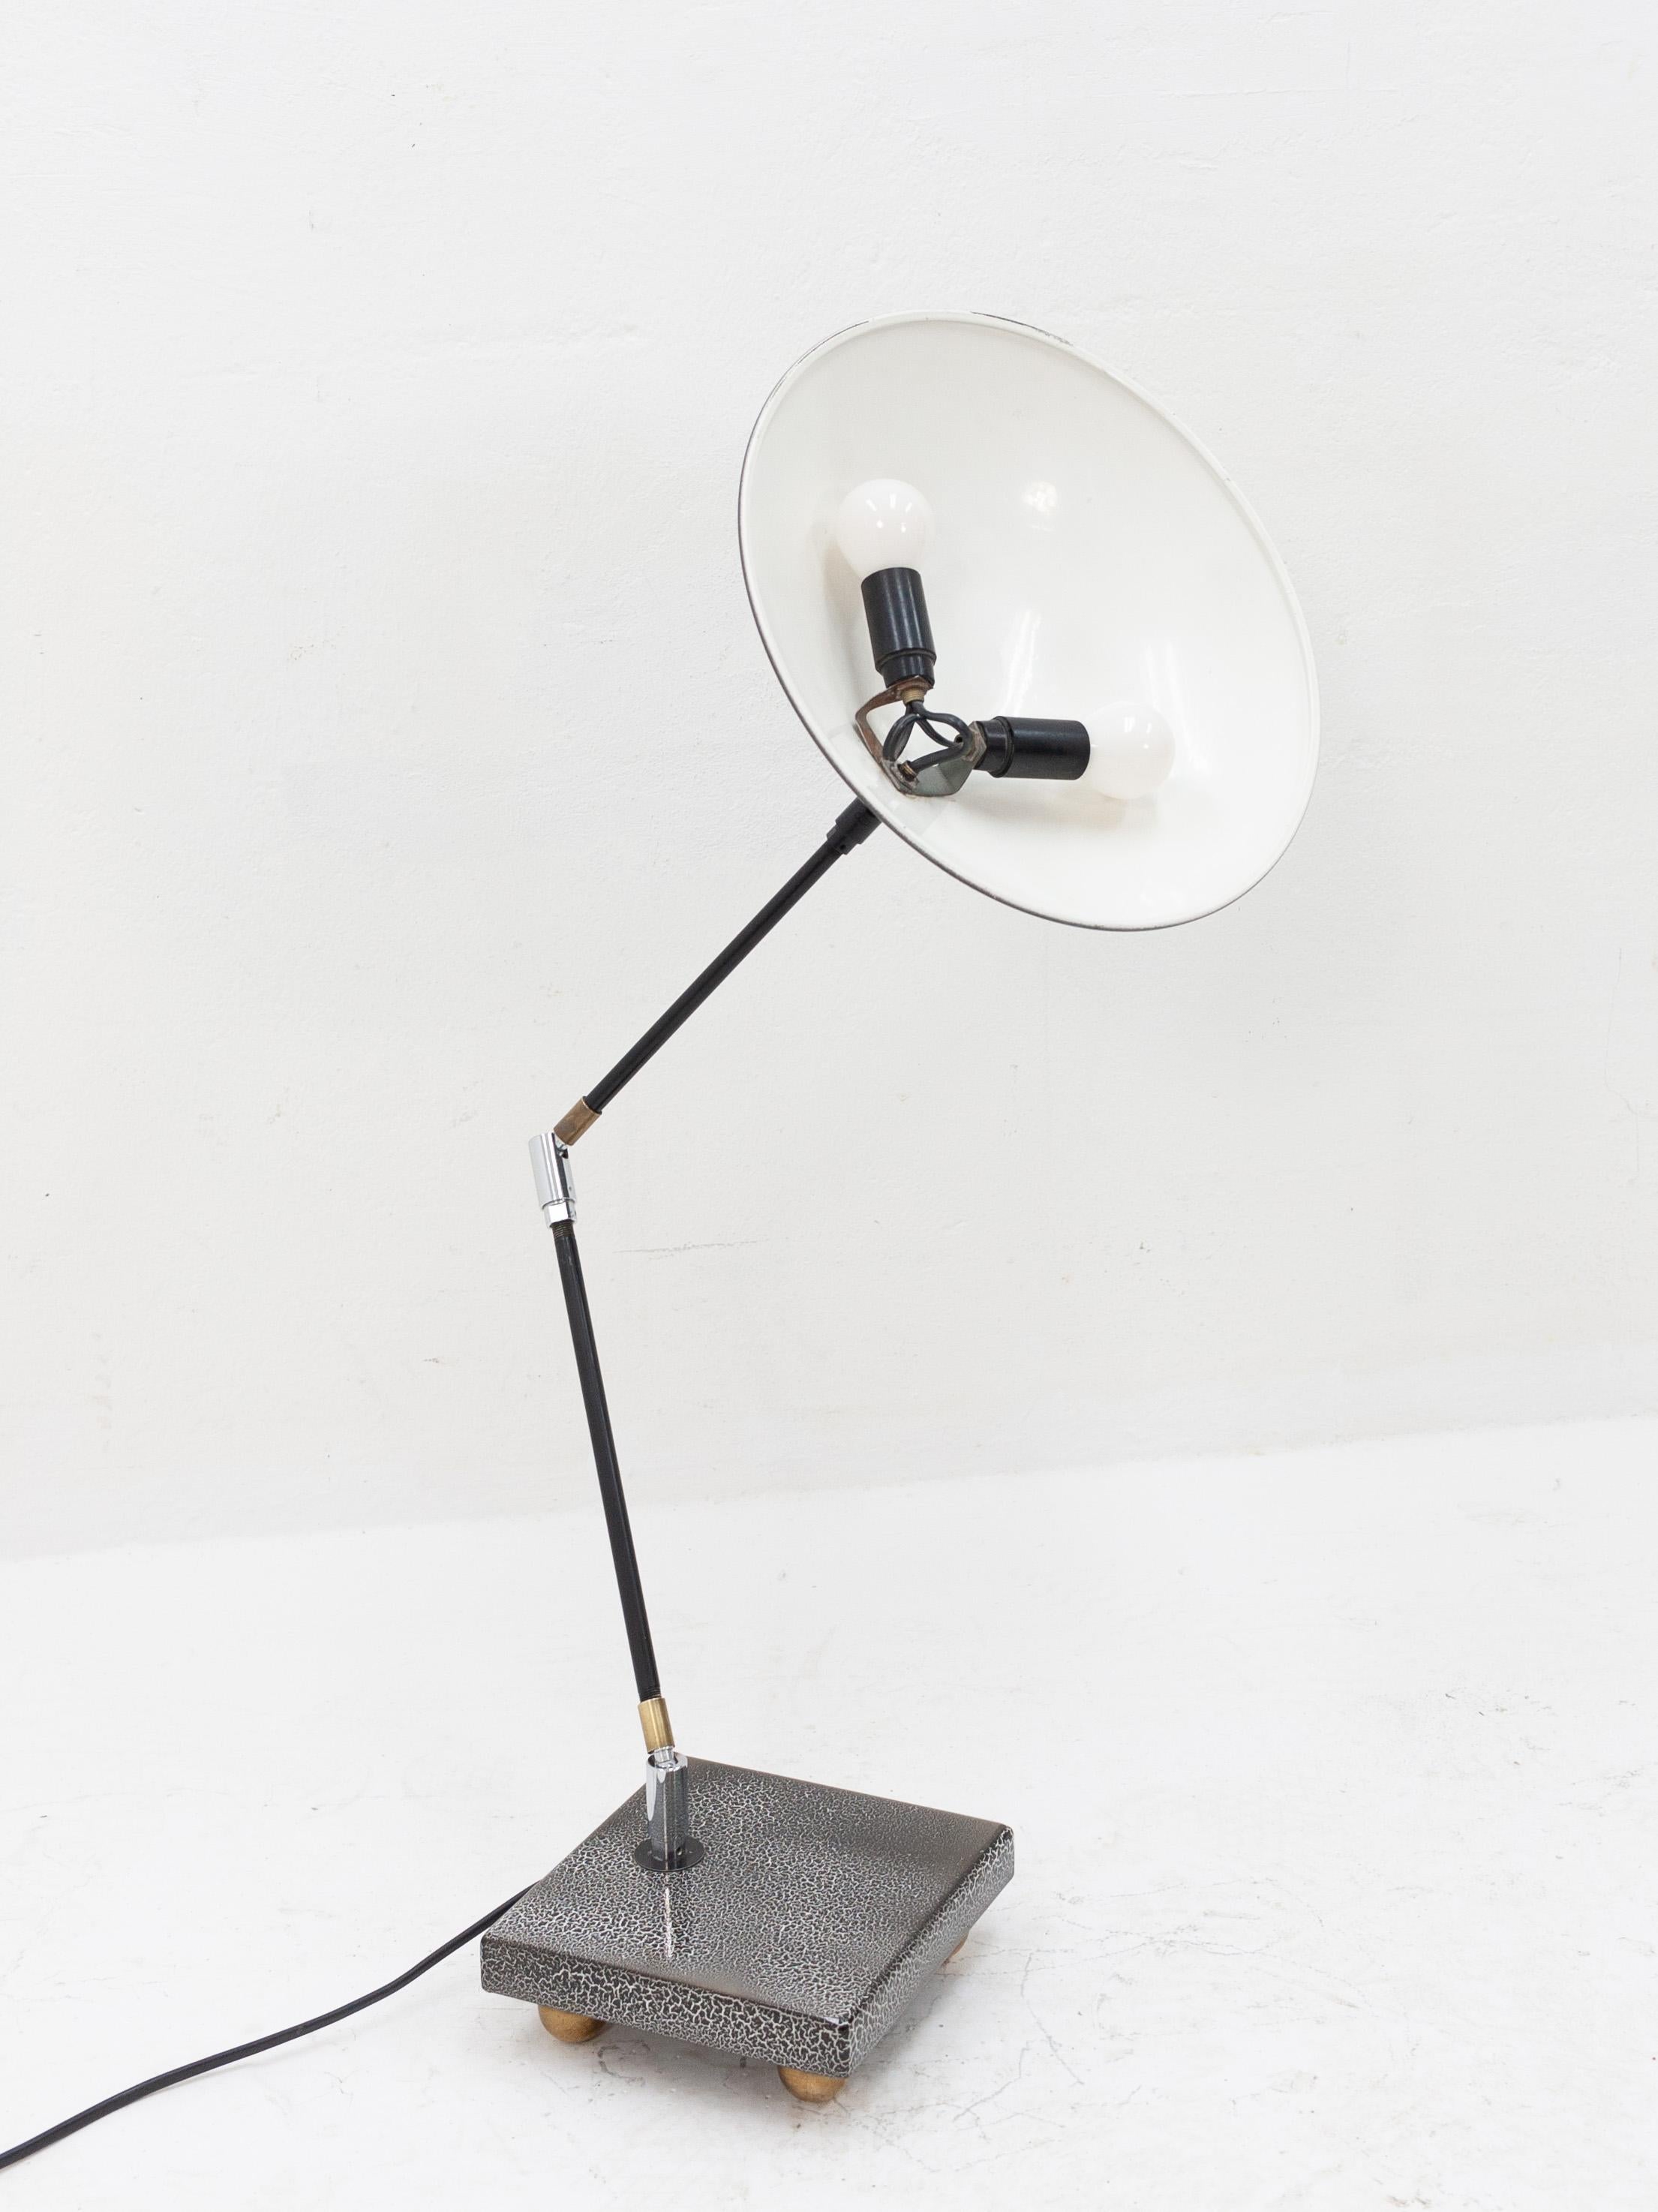 Curious Memphis style metal desk lamp featuring a typical 1980s style shade/armature assembly mounted to an unusual square metal base on brass ball feet. Three ball joints in the long segmented arm allow the user to aim the light in any desire they